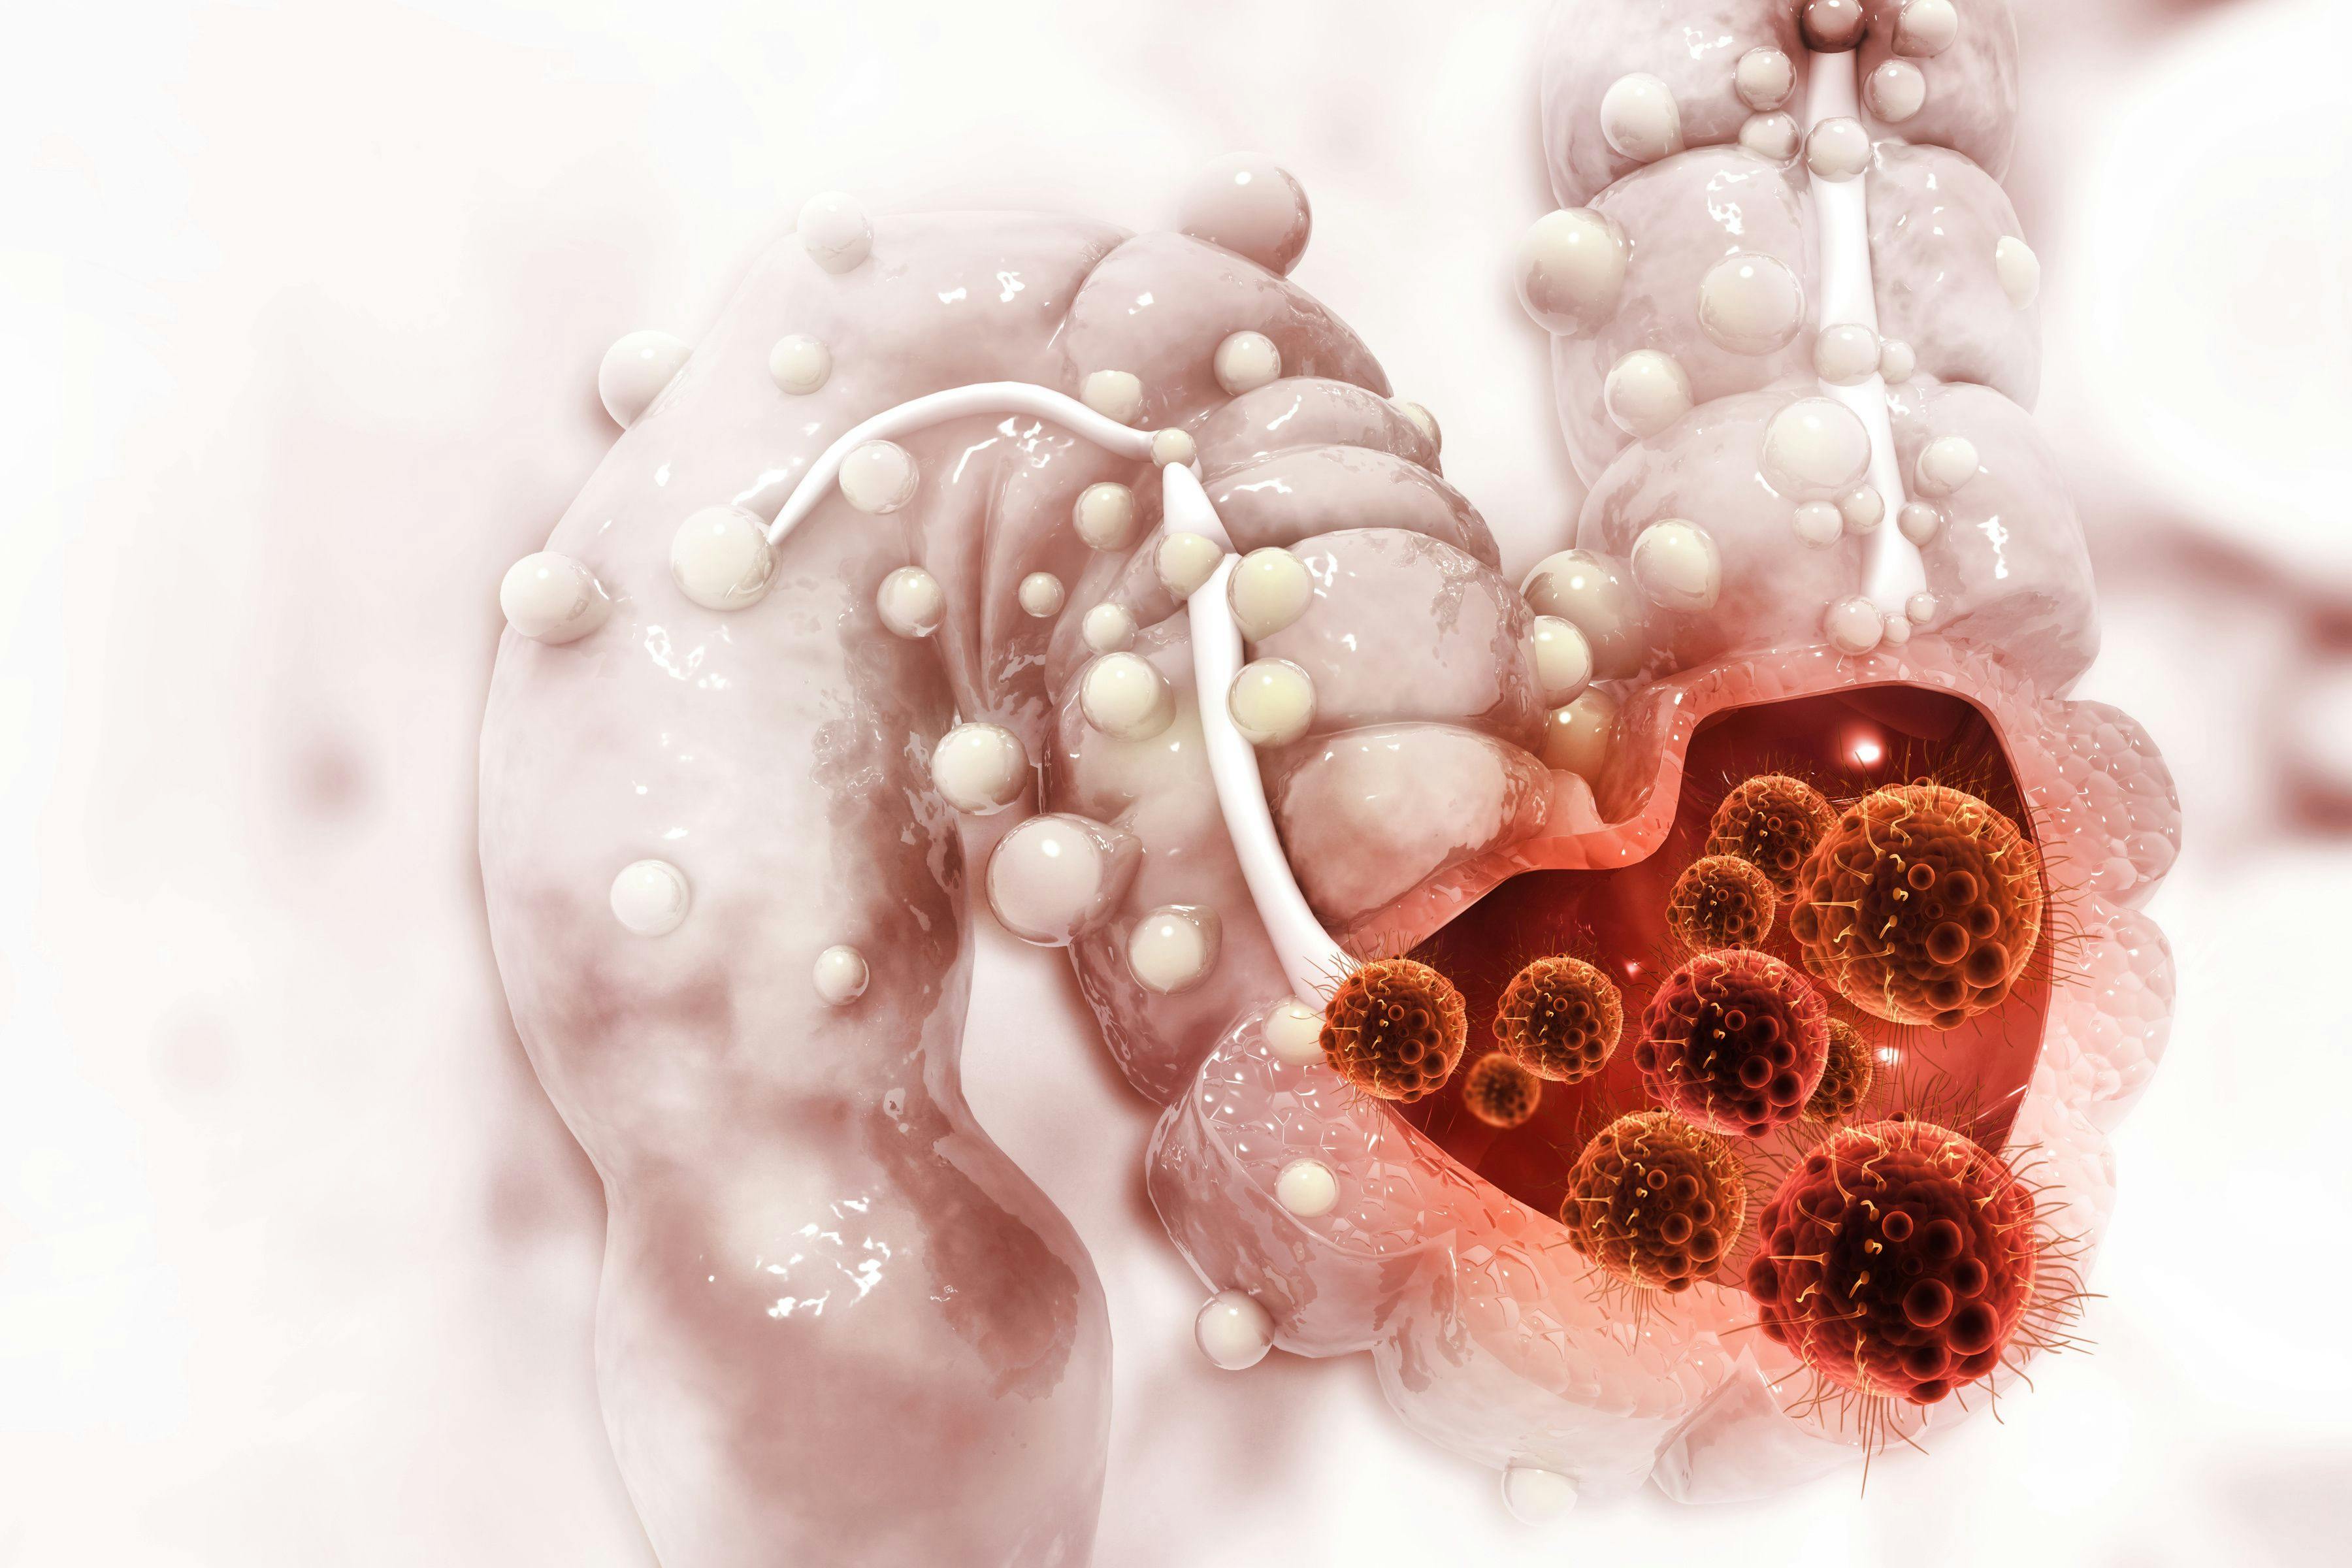 Cancer cells in colon | Image credit: Crystal light - stock.adobe.com